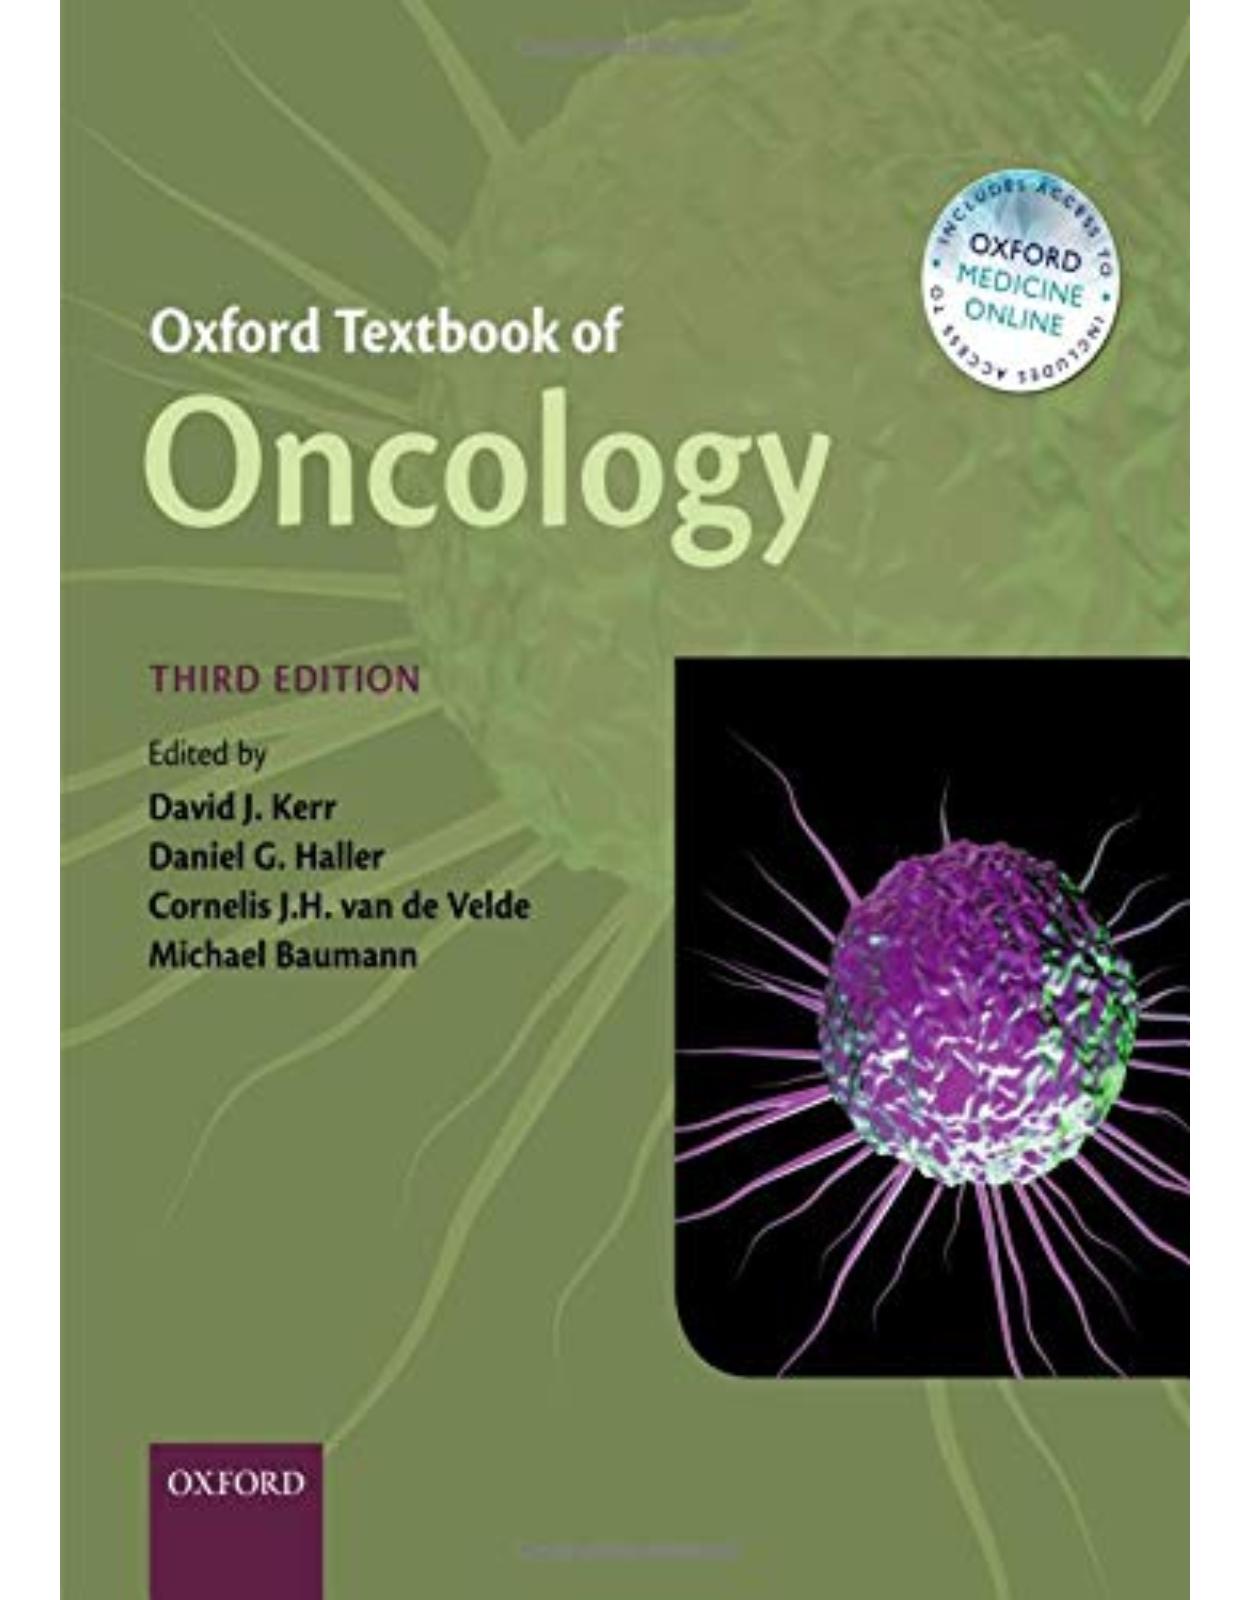 Oxford Textbook of Oncology 